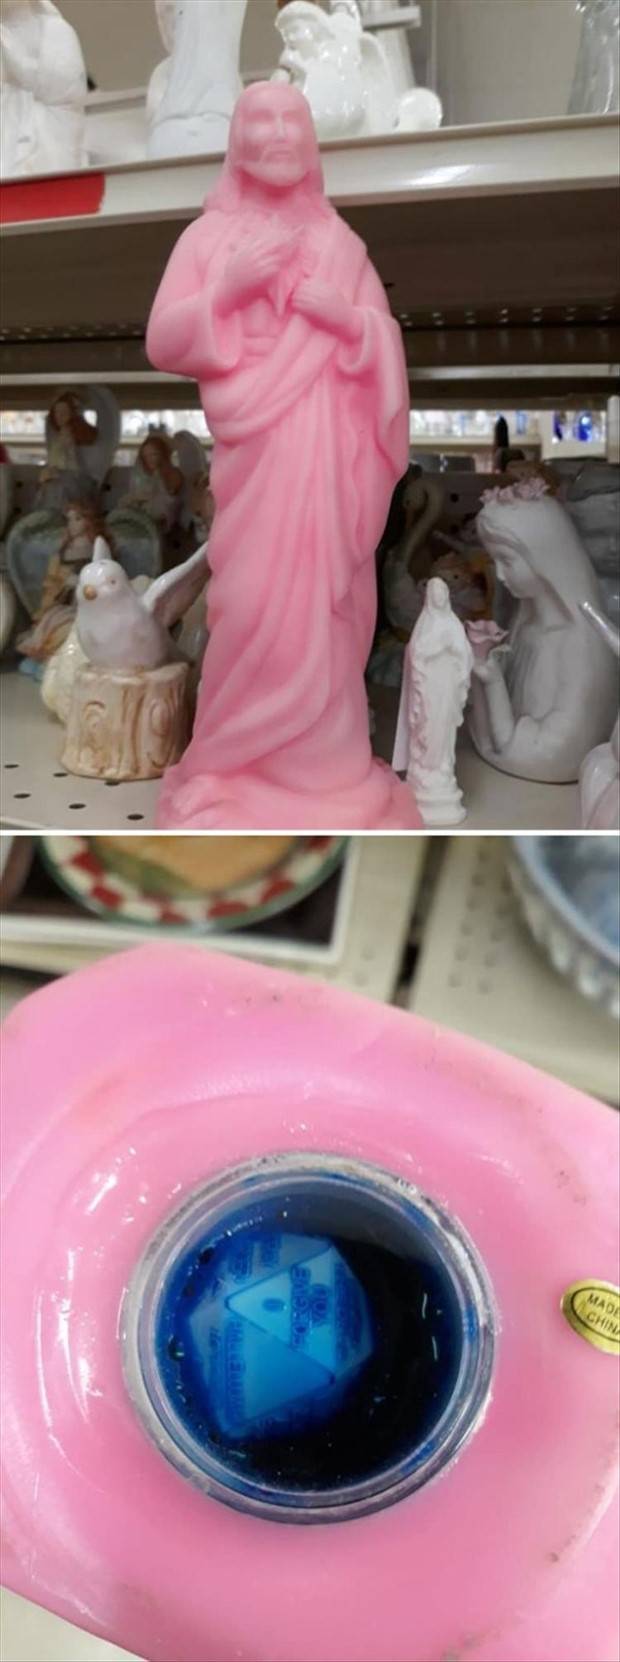 Strange Things Found In Thrift Stores #8 (44 photos)